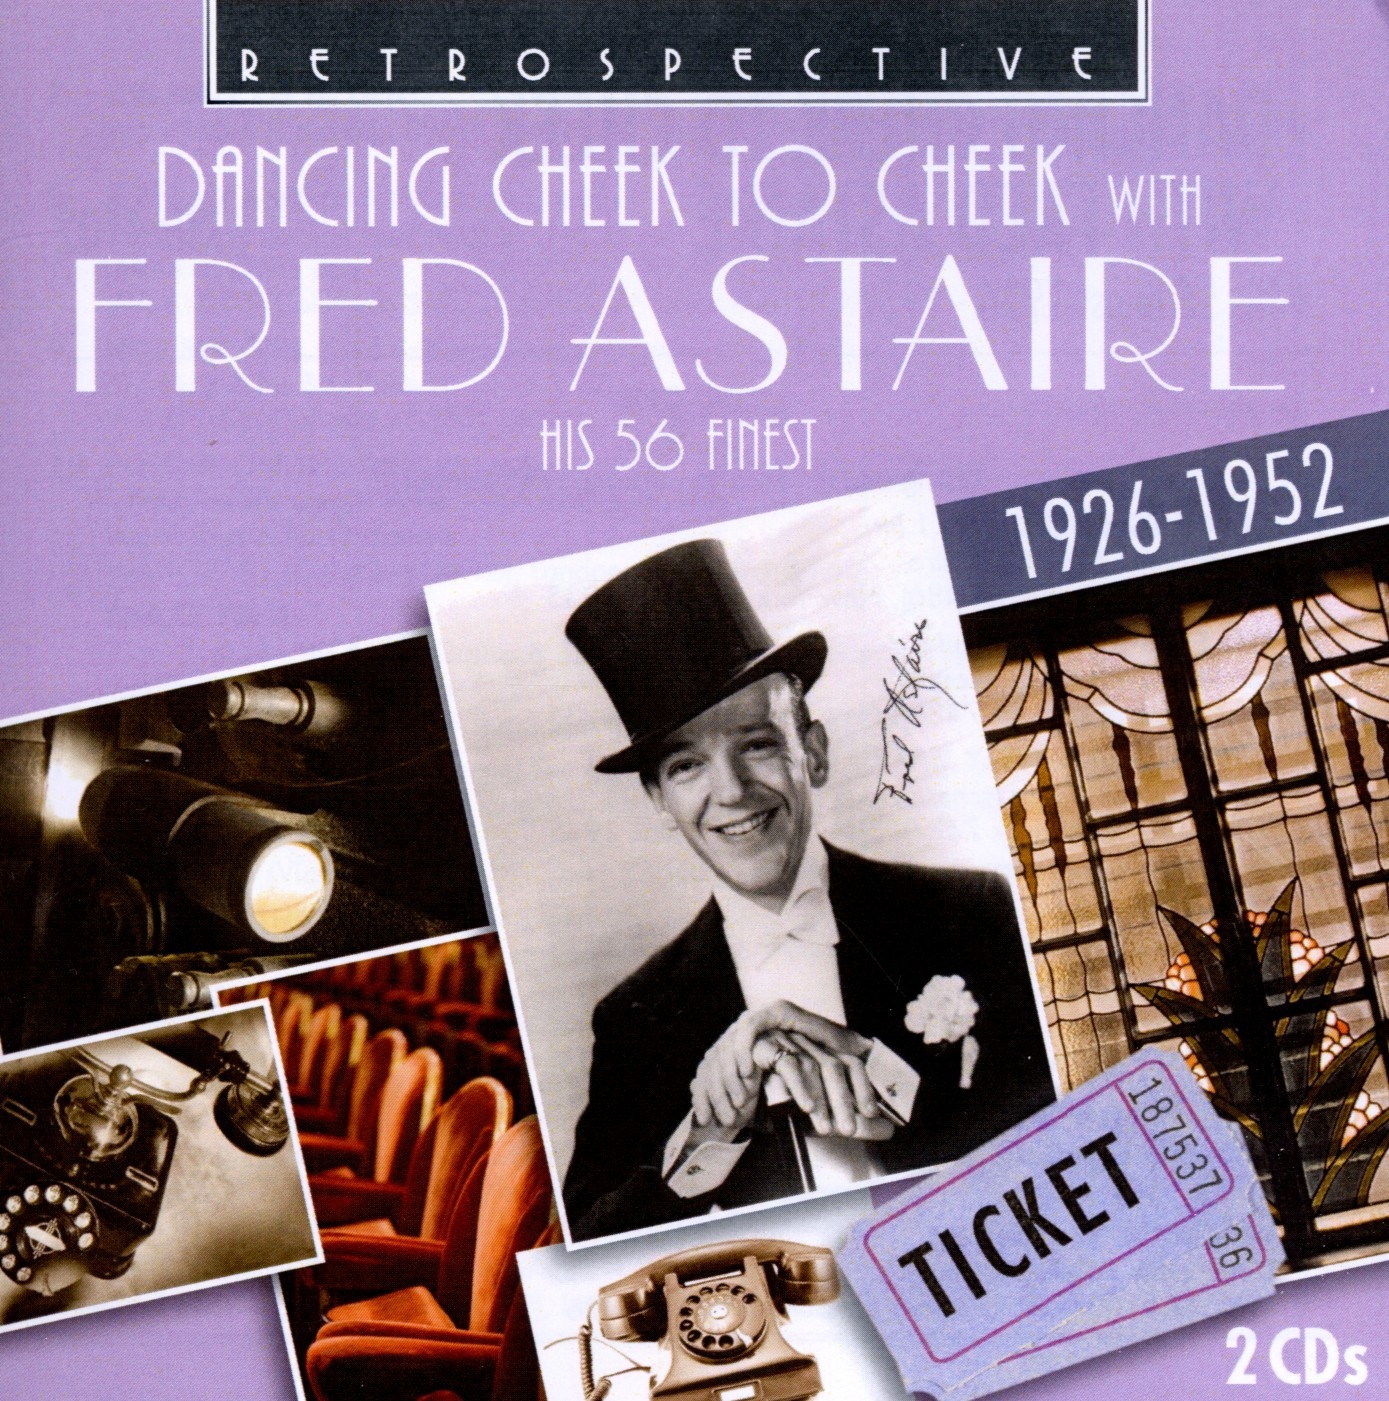 Cheek To Cheek - Fred Astaire. (CD)